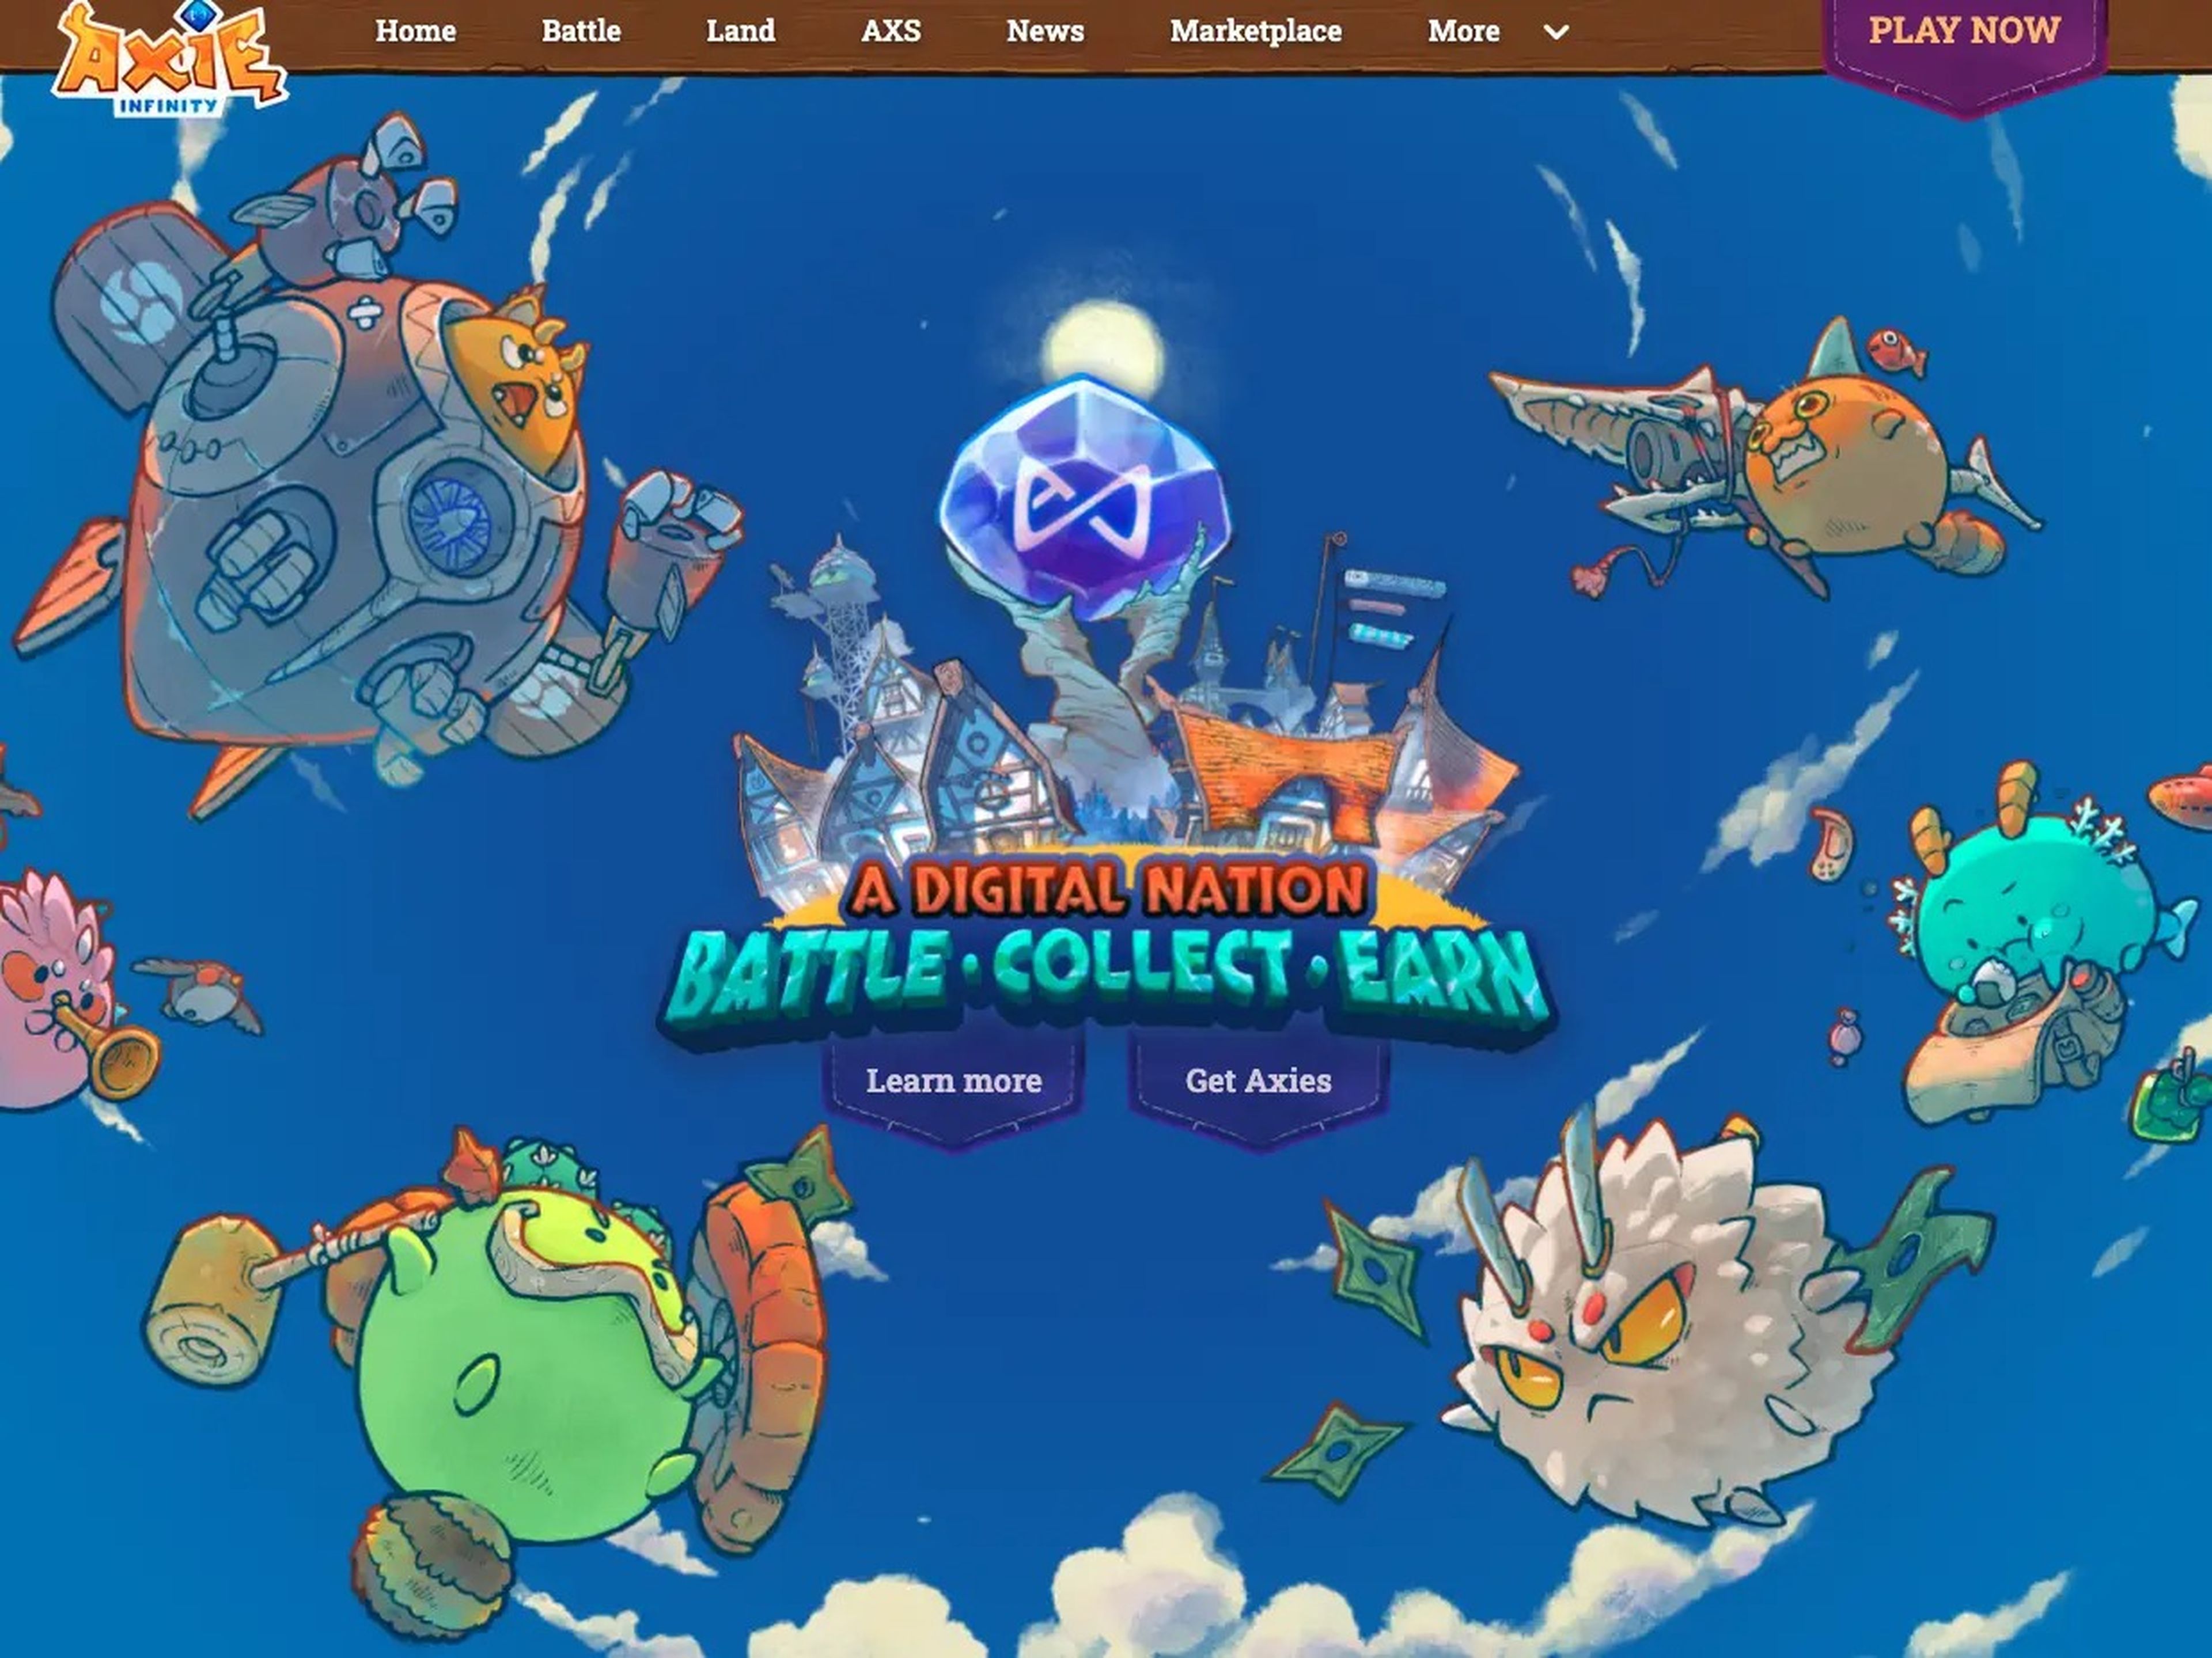 Axie Infinity provides NFTs that cater to the gaming community.